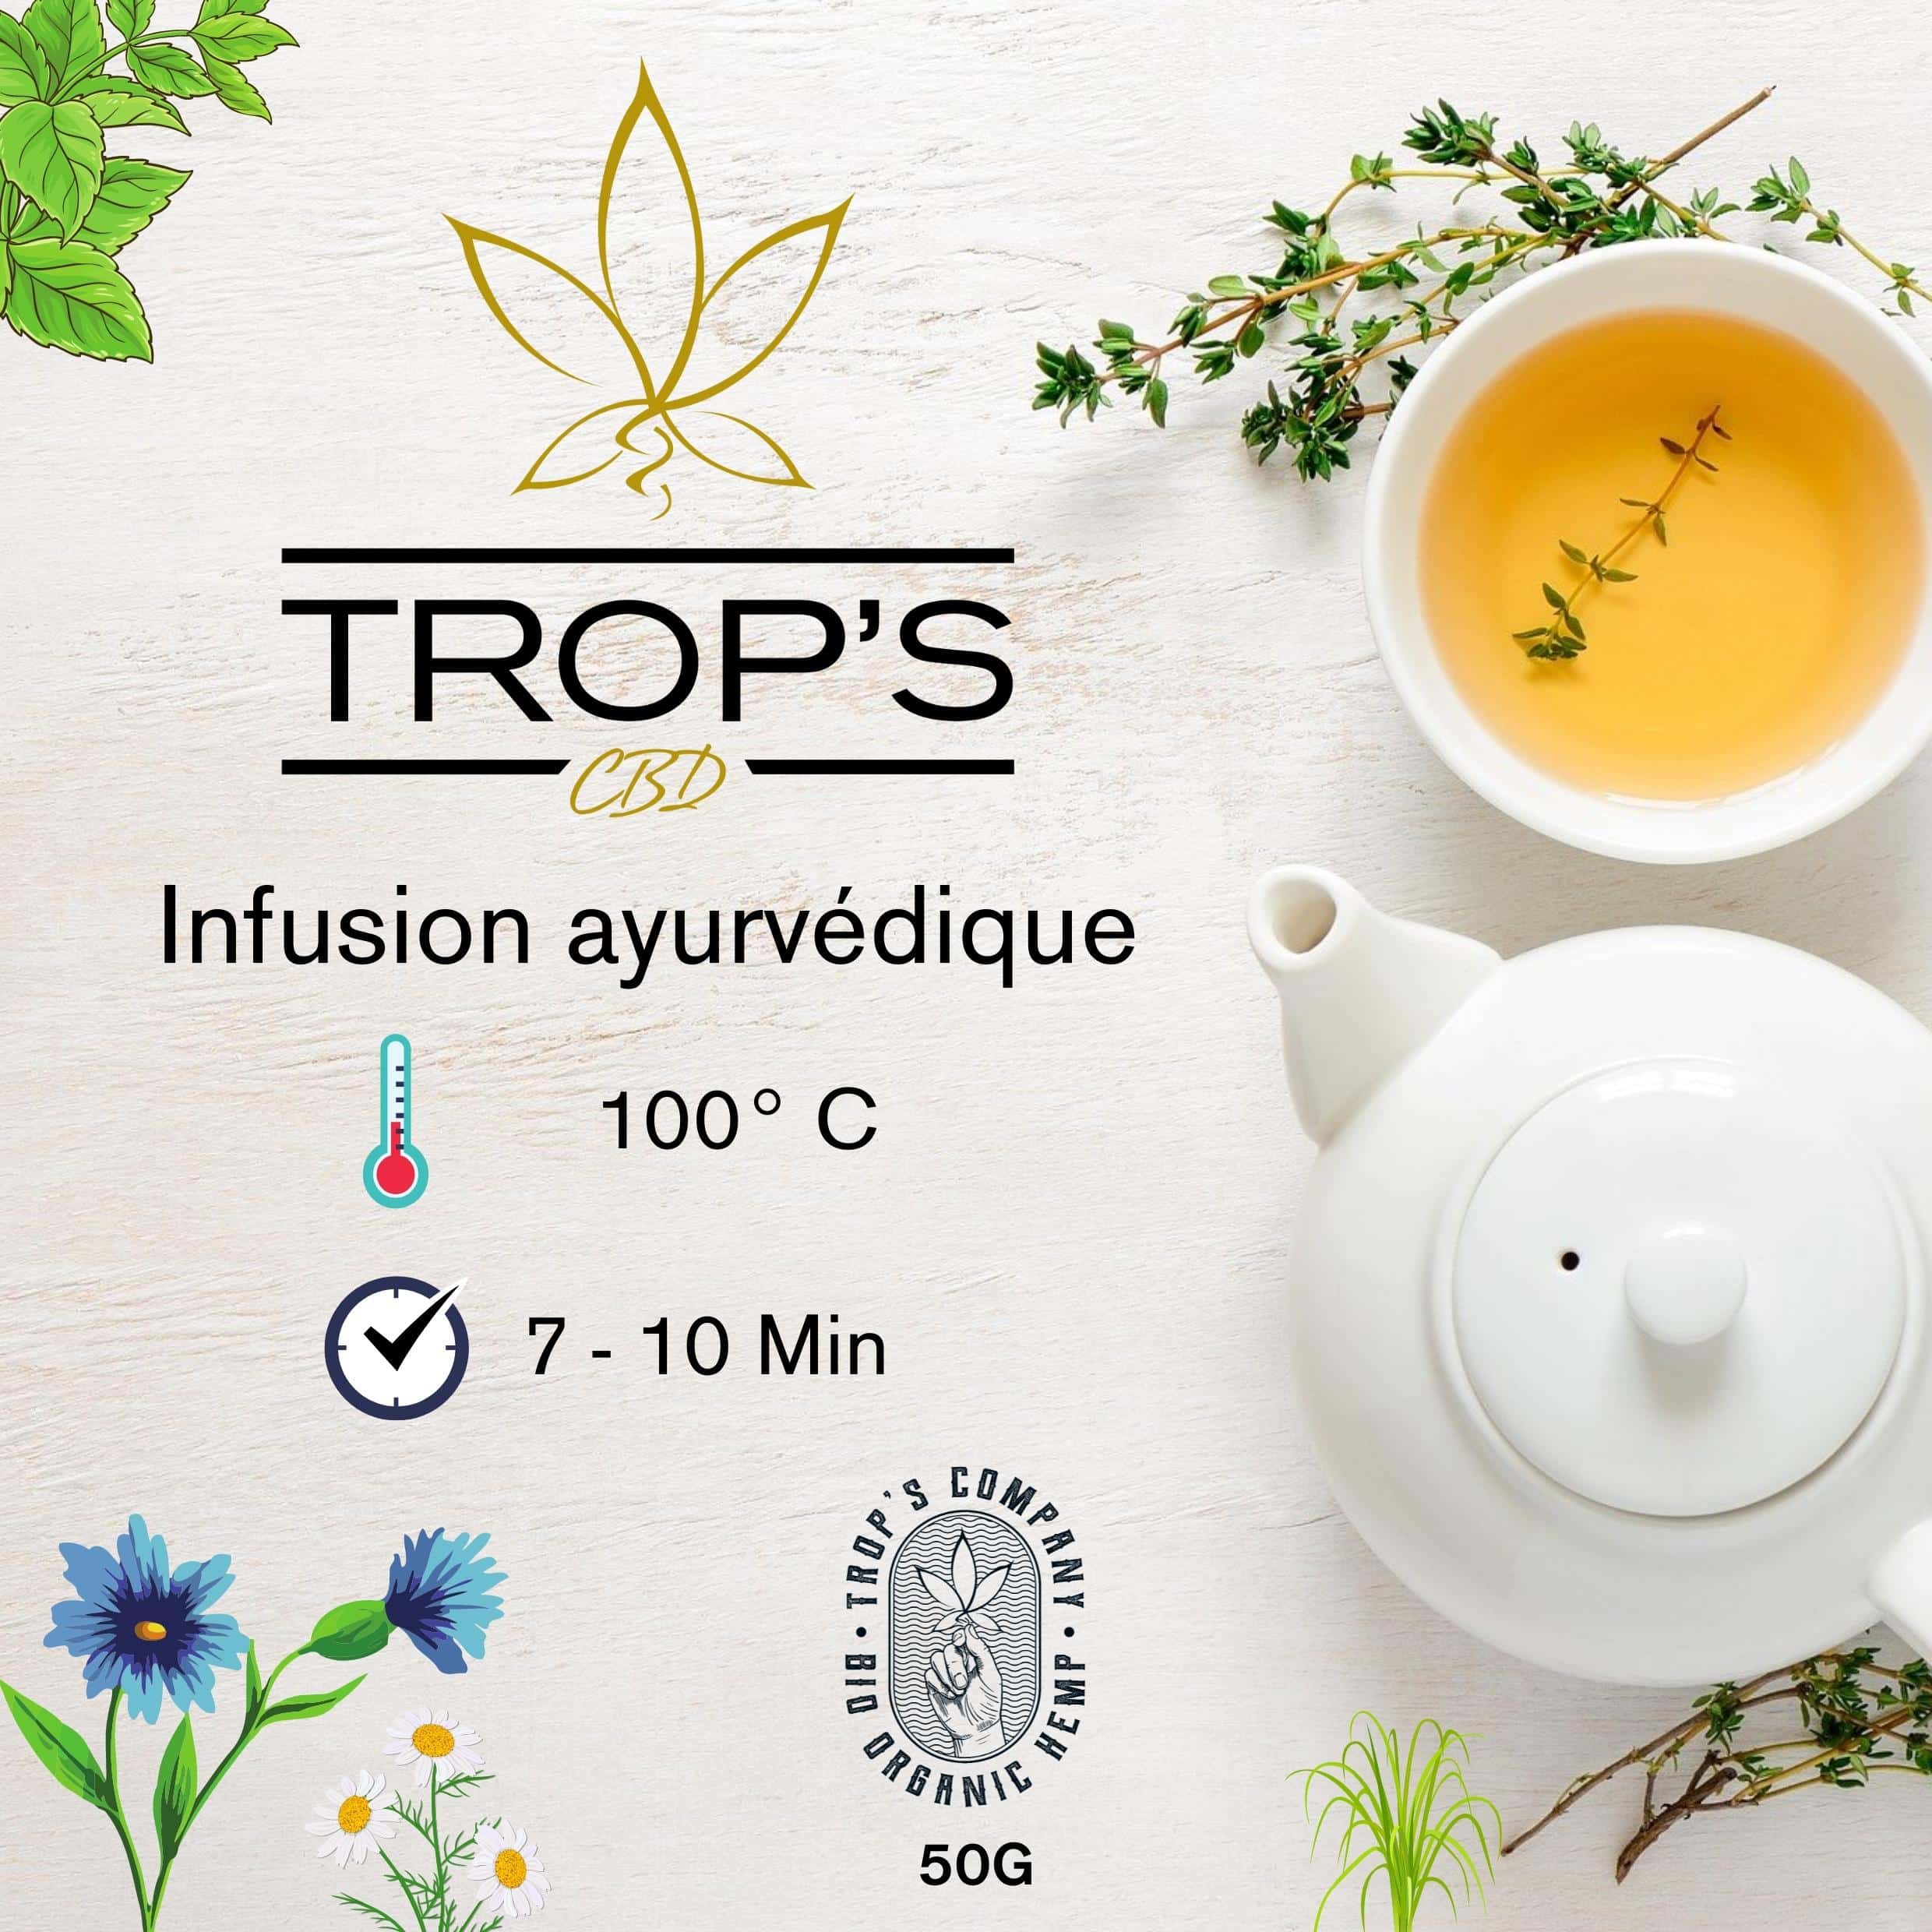 INFUSION AYURVEDIQUE 50G